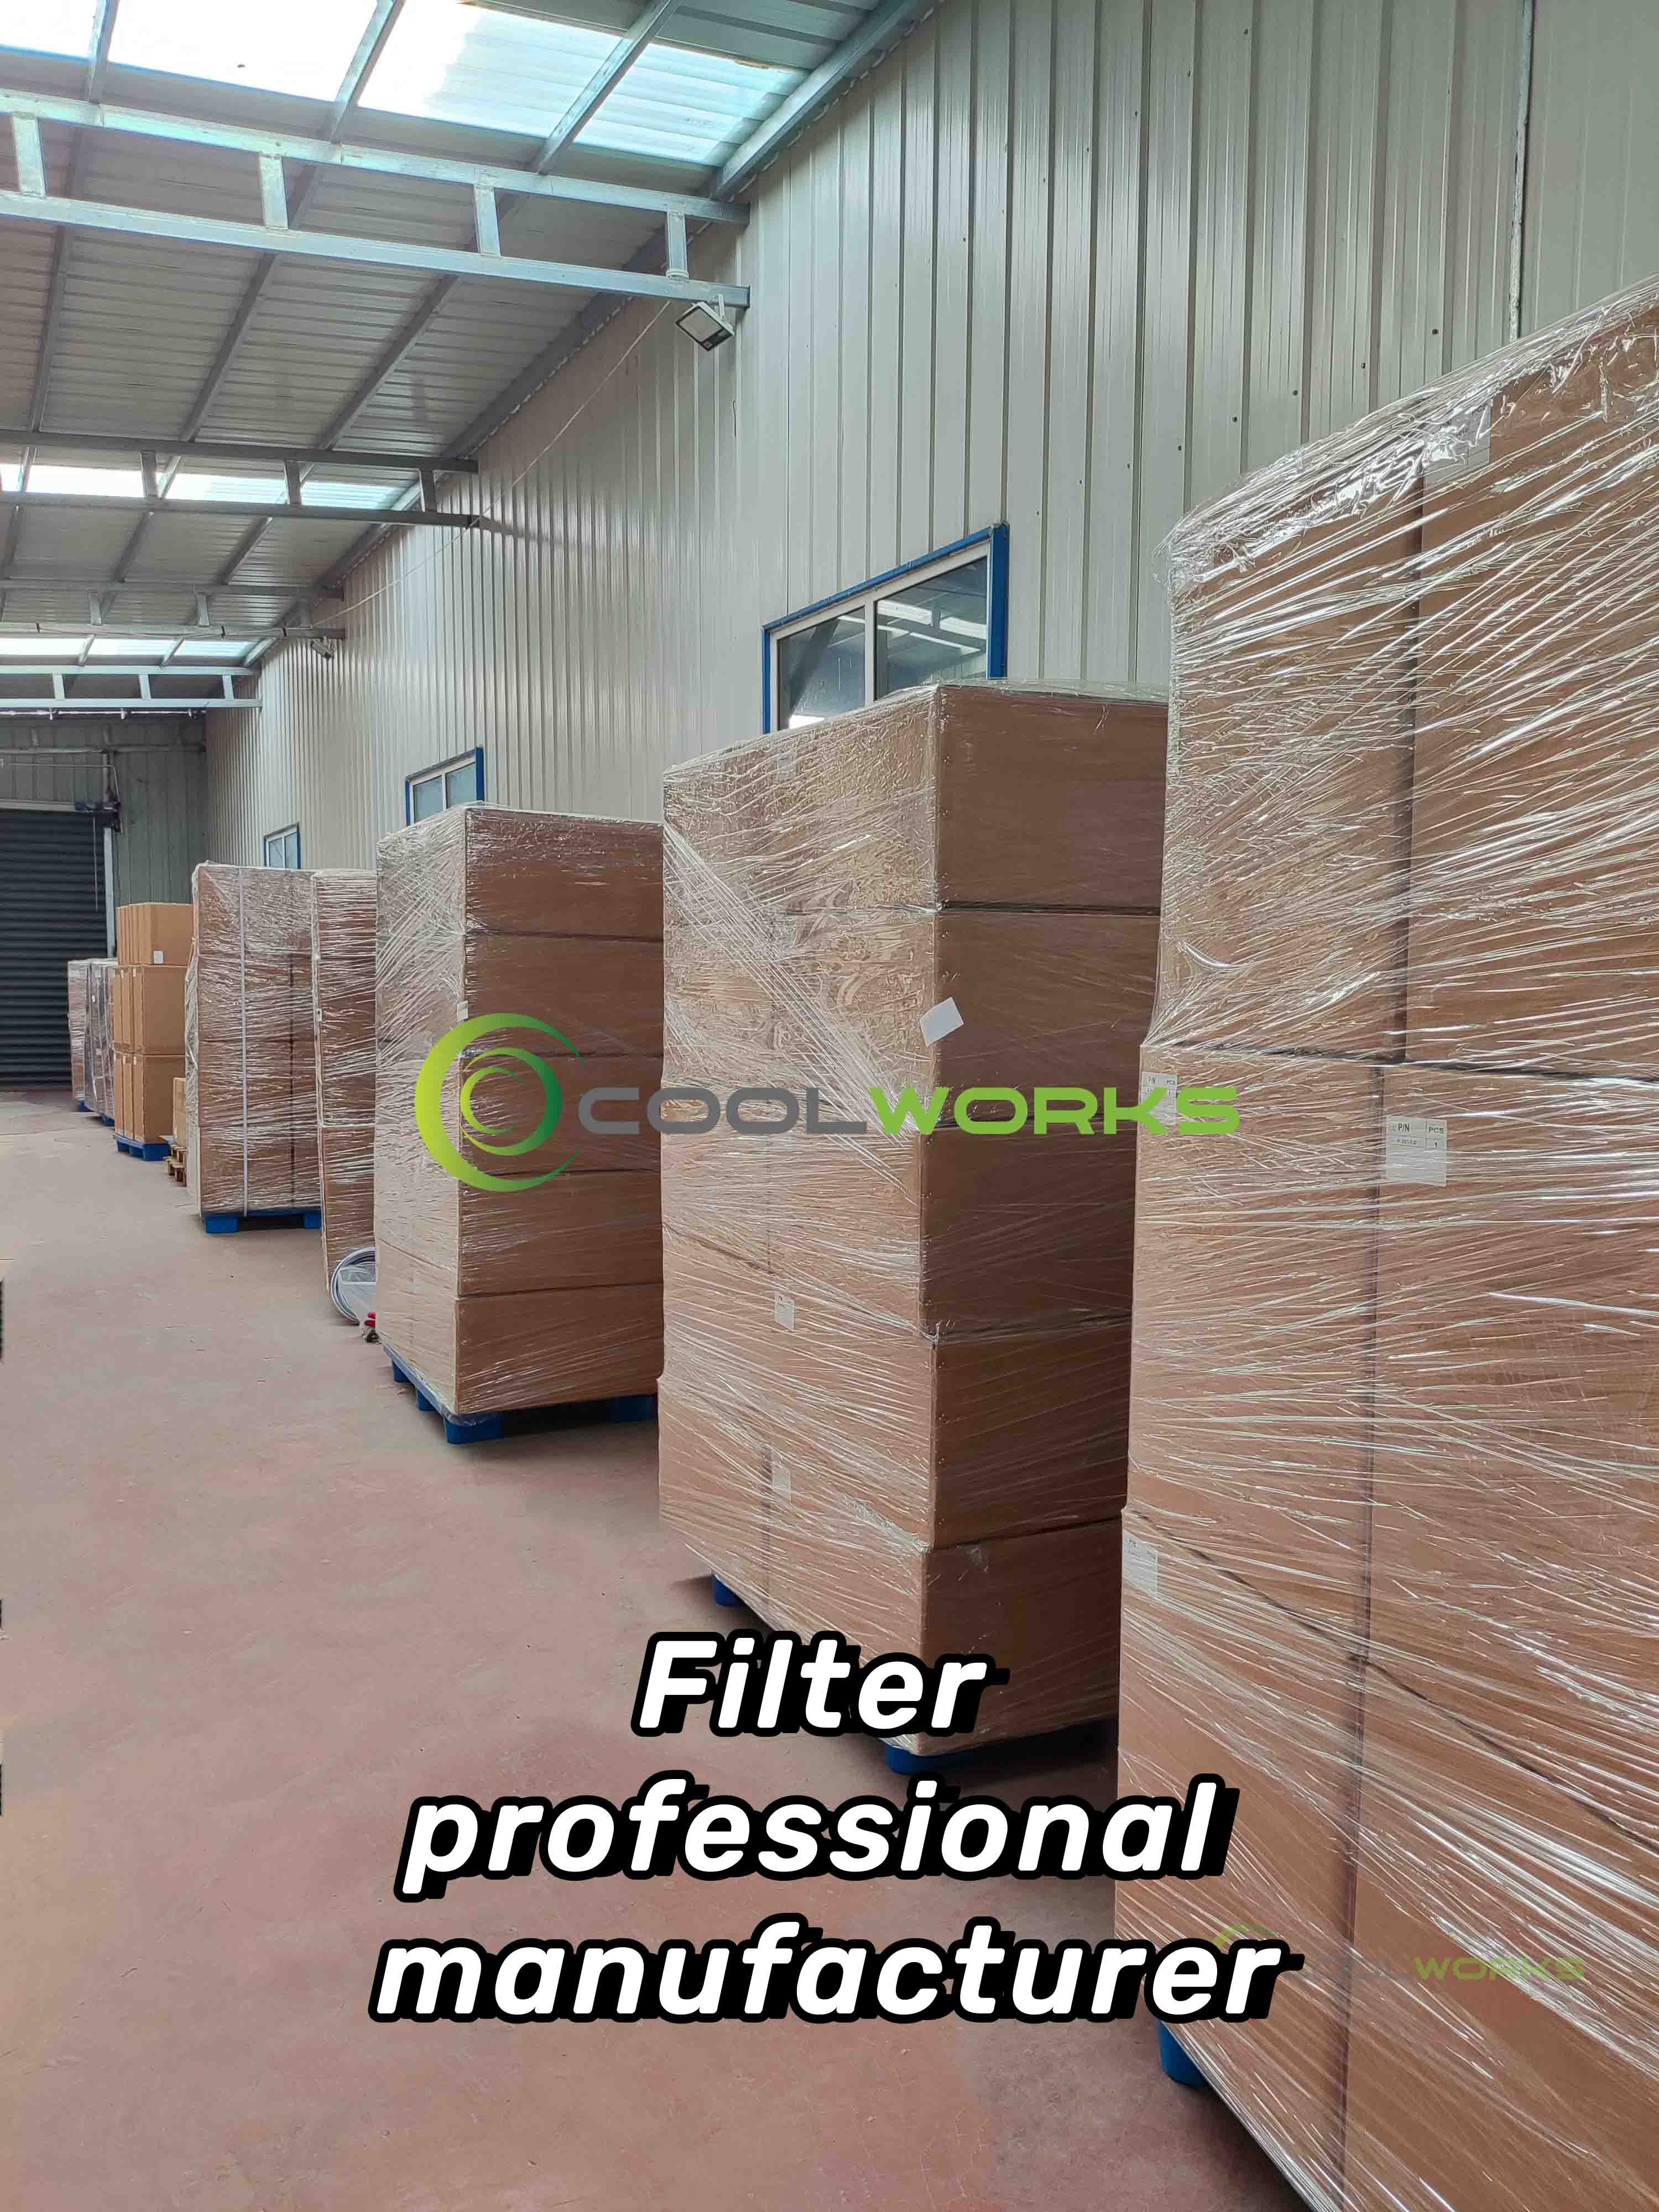 Coolworks specializes in the manufacture of screw air compressor filters.